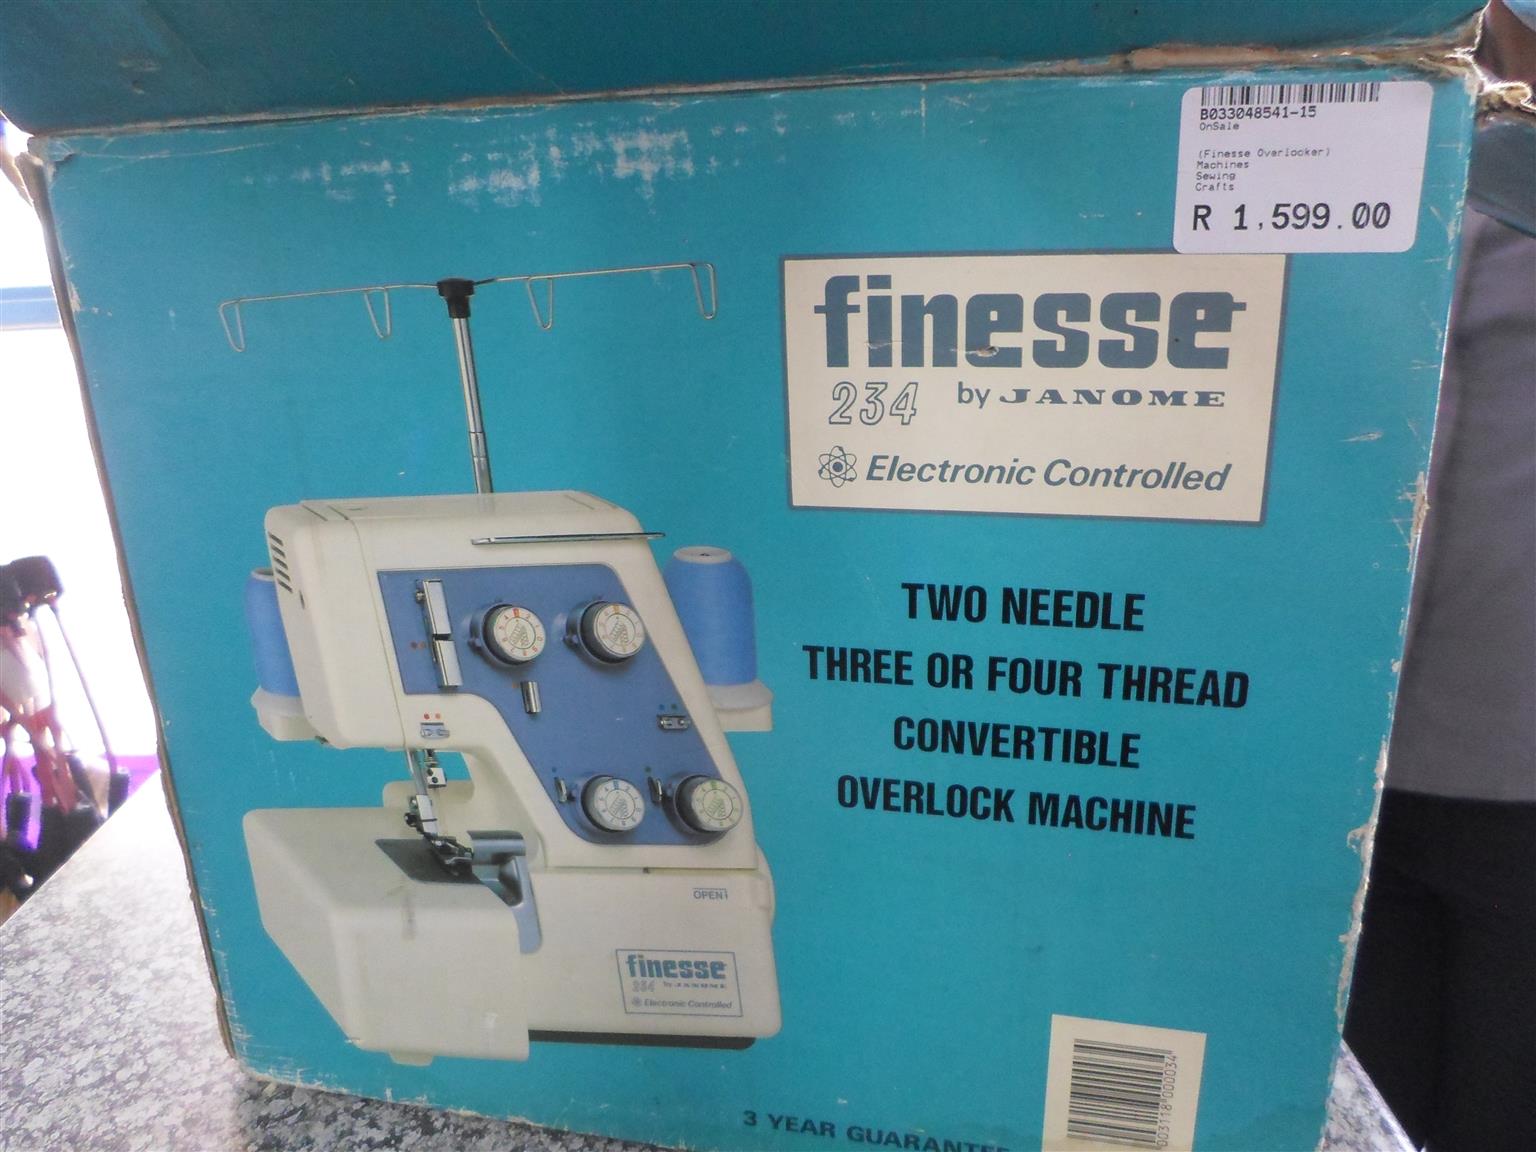 Finess 234 by Janome Sewing Machine 